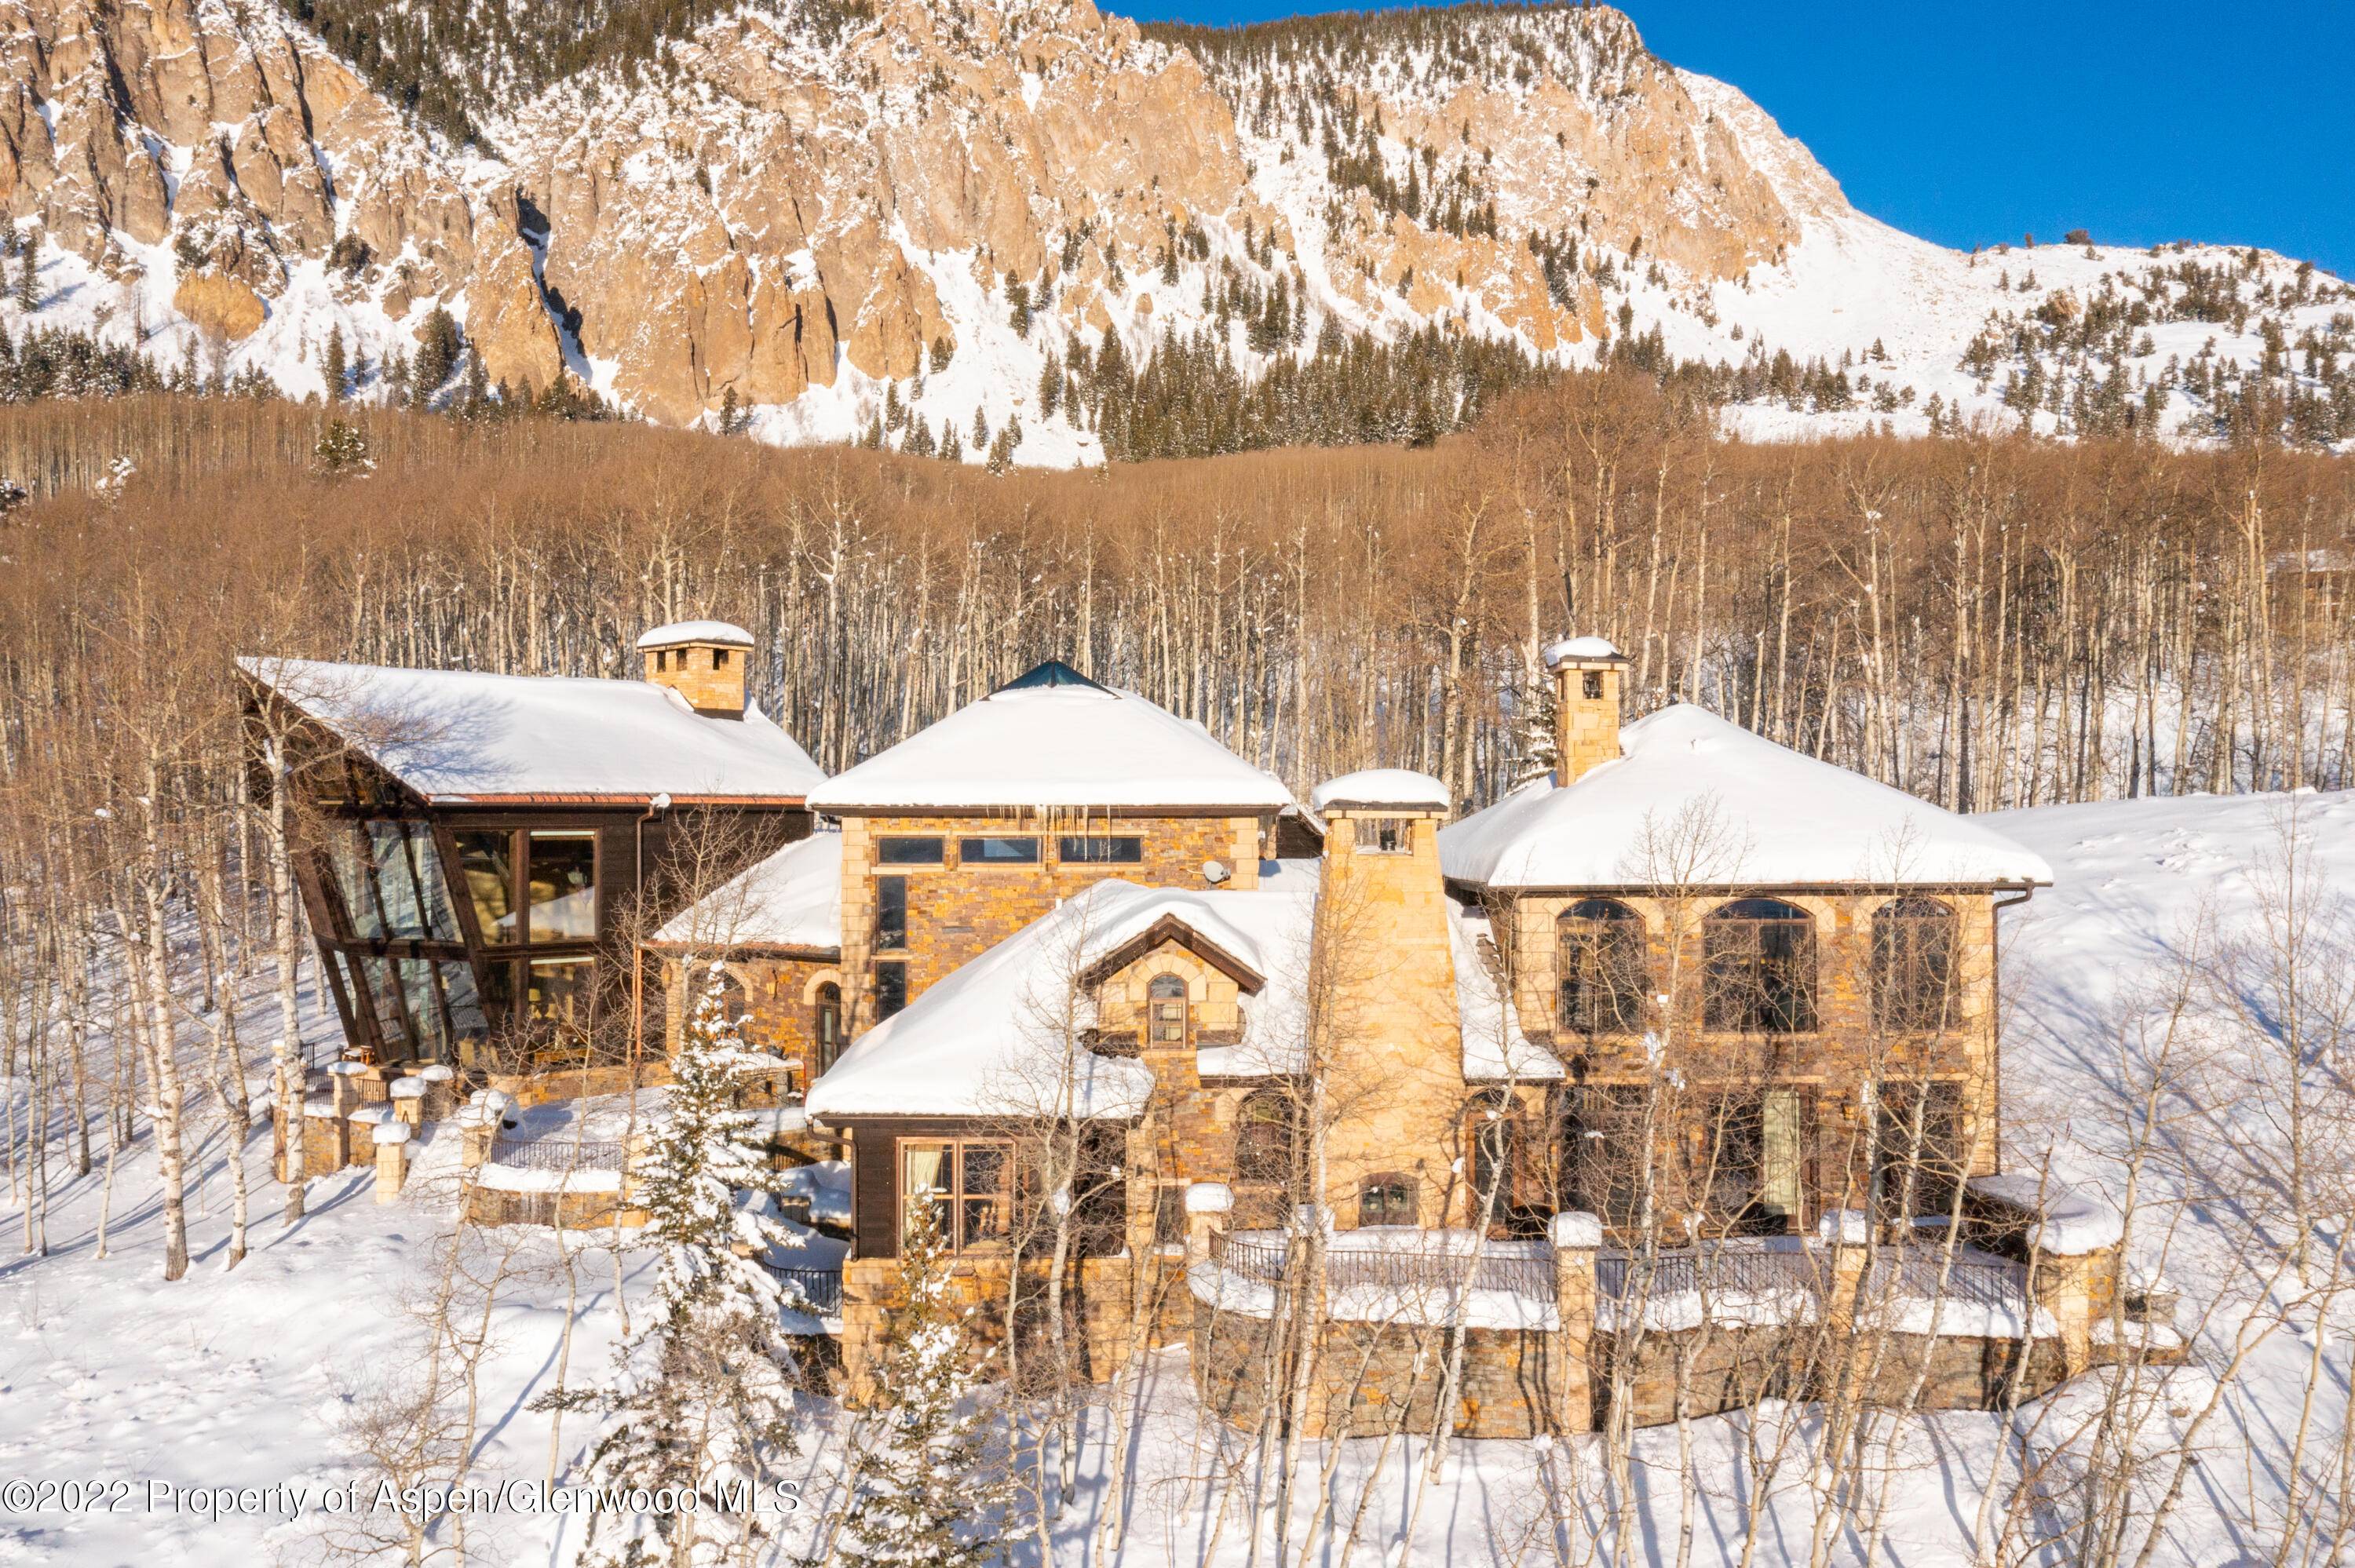 The Taylor Crest Manor, a modern day castle awaits you, backing to 50, 000 acres of natural forest at the base of Mount Crested Butte.